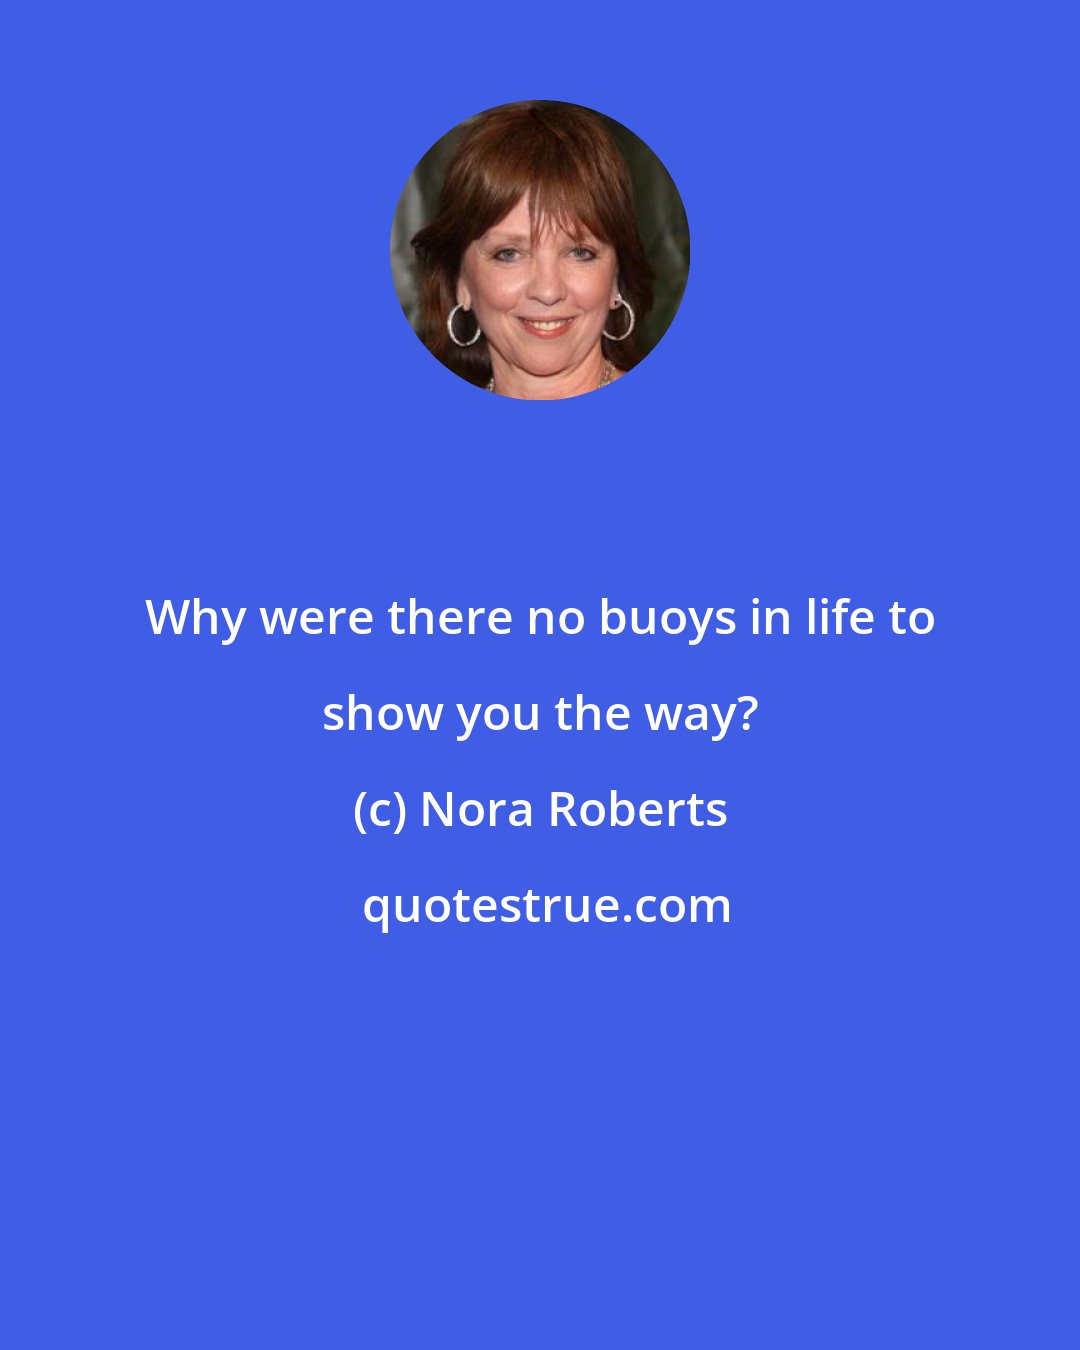 Nora Roberts: Why were there no buoys in life to show you the way?